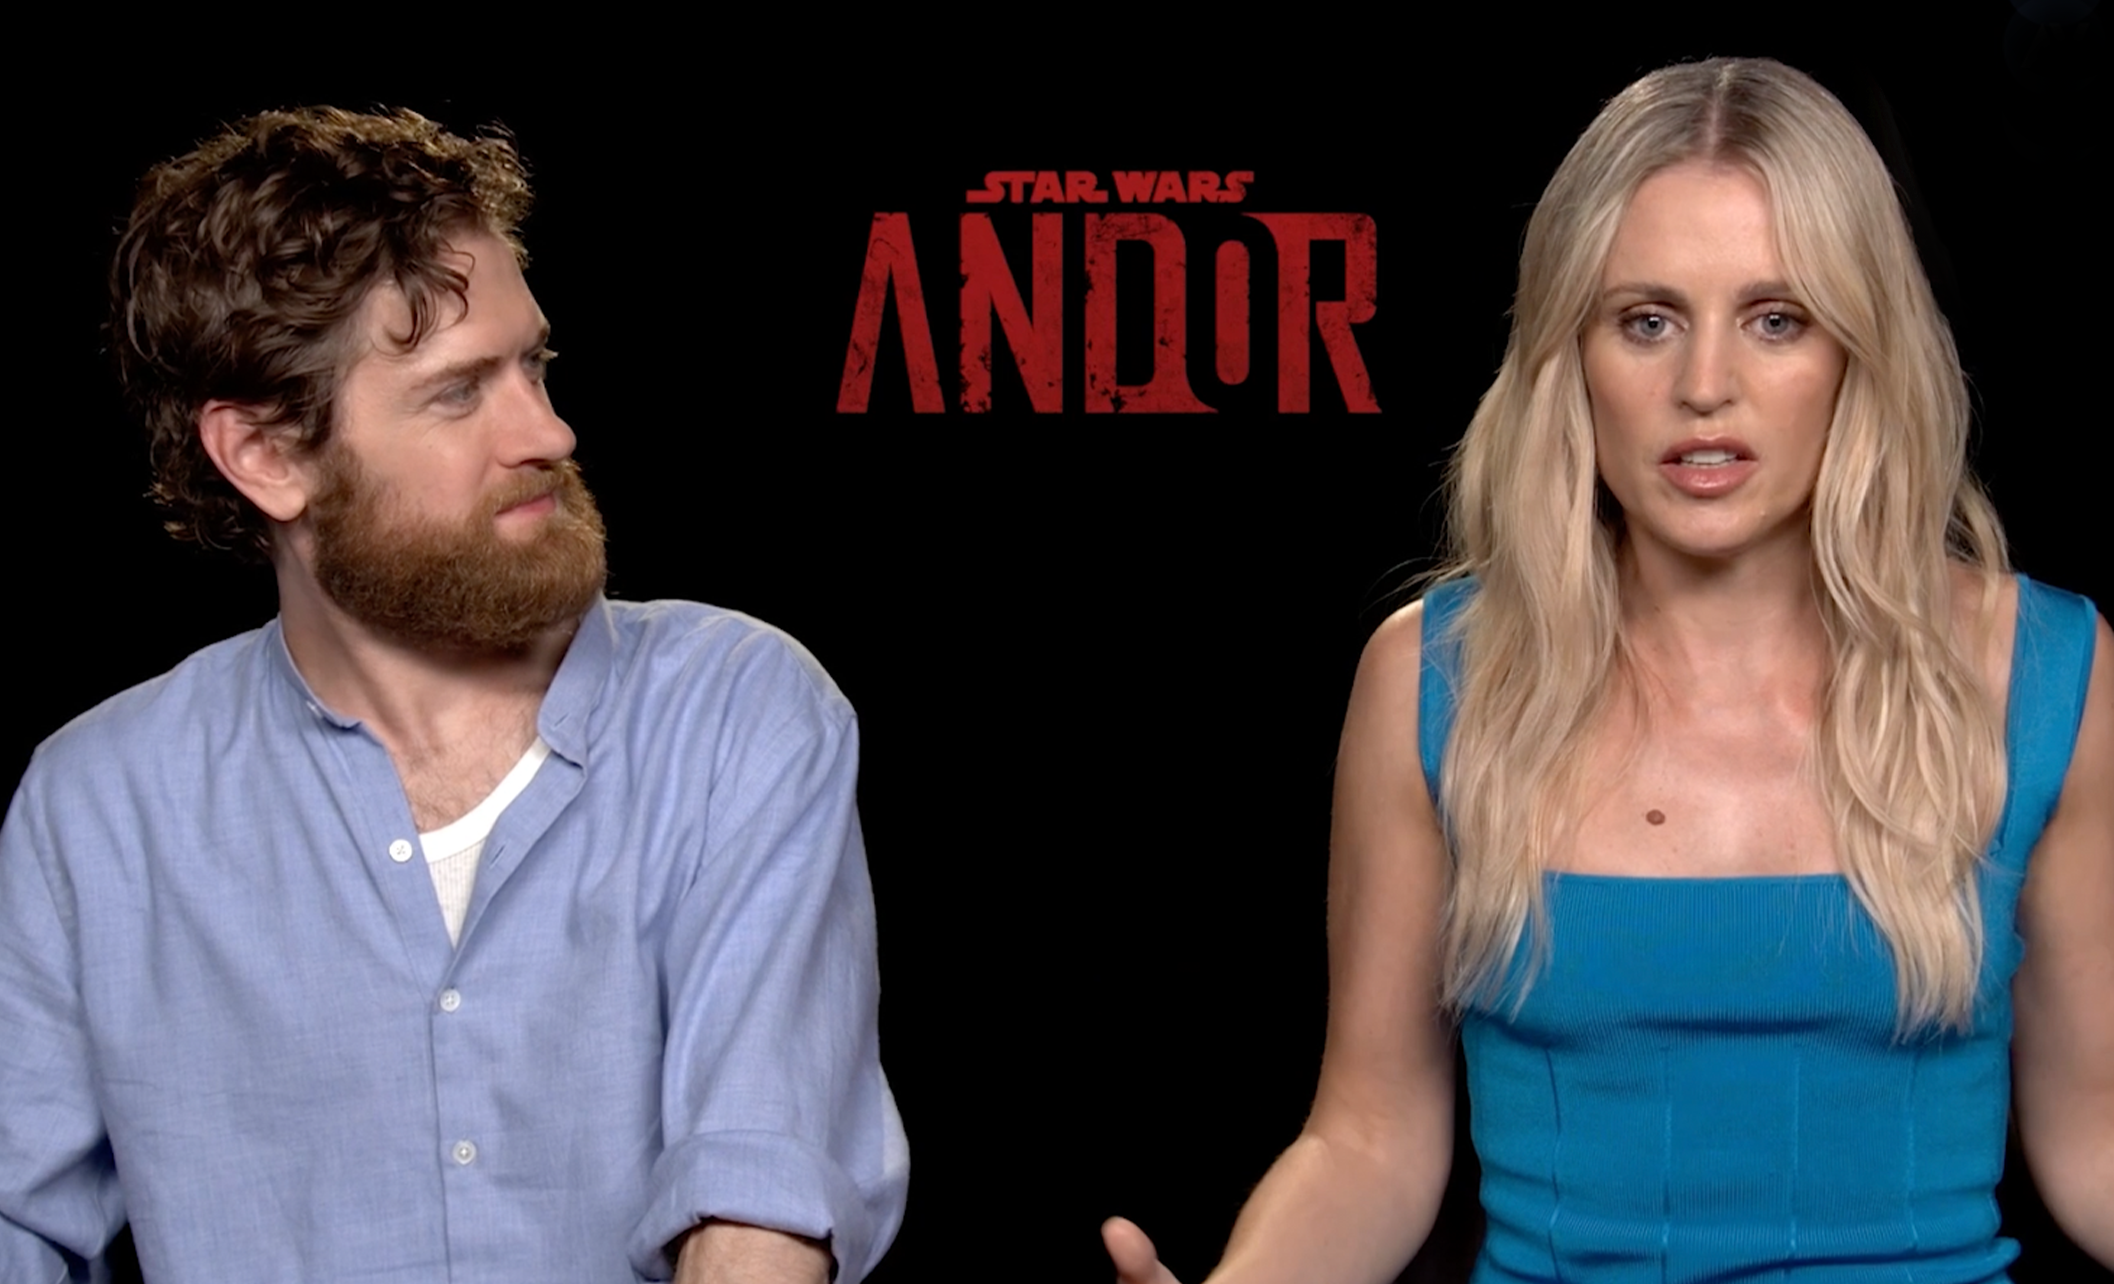 Kyle Soller and Denise Gough reveal their Star Wars bucket lists